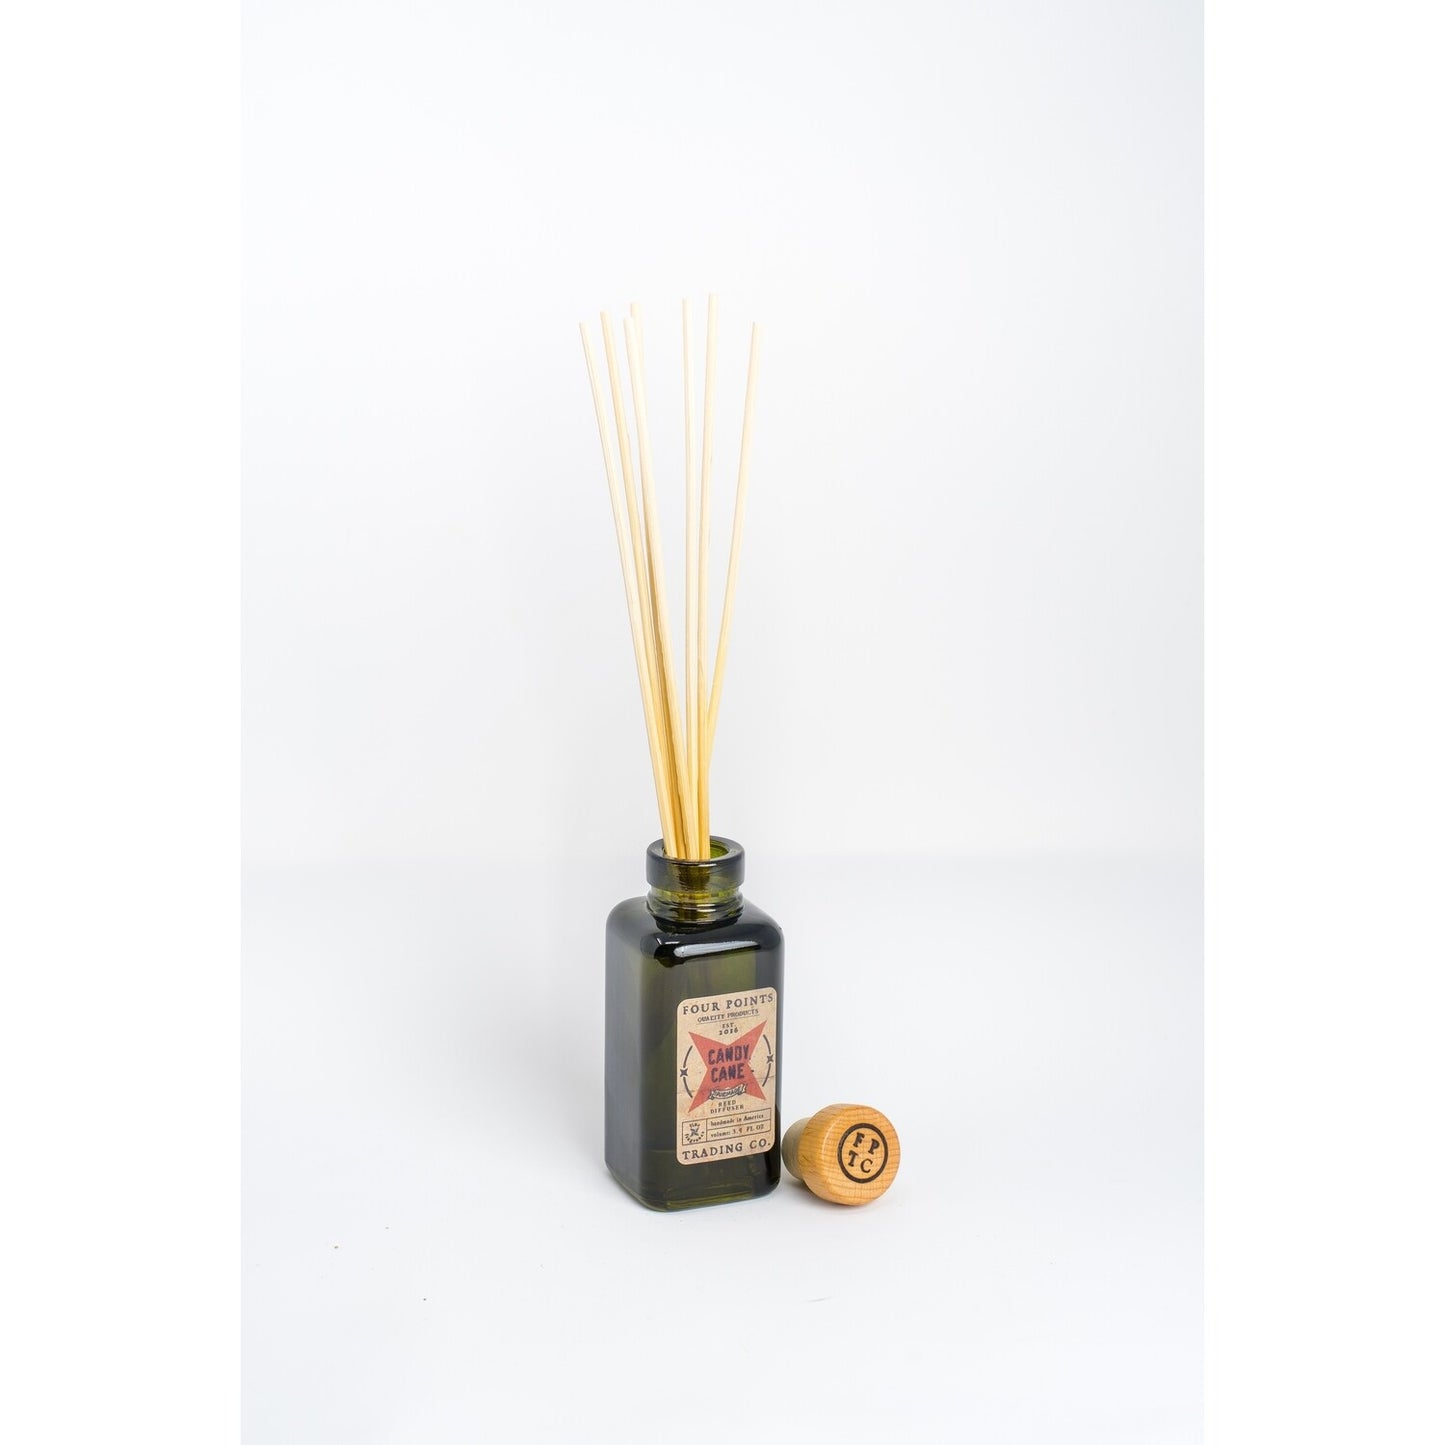 Candy Cane Reed Diffuser